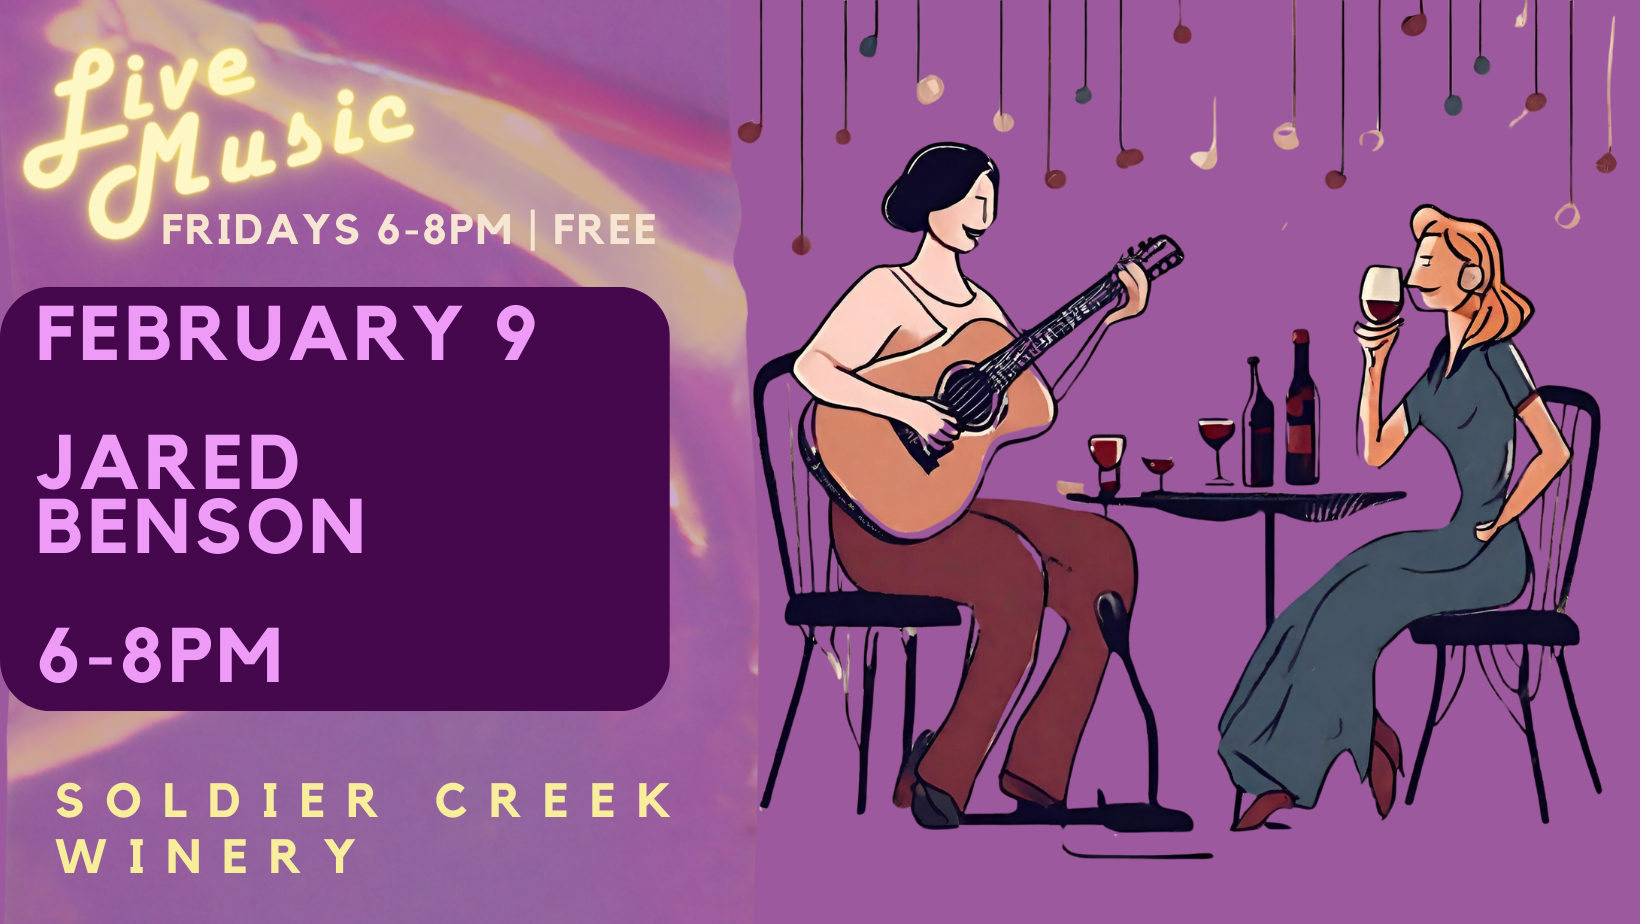 free, live music every friday at soldier creek winery. february 9 is jared benson from 6-8pm. free to listen.